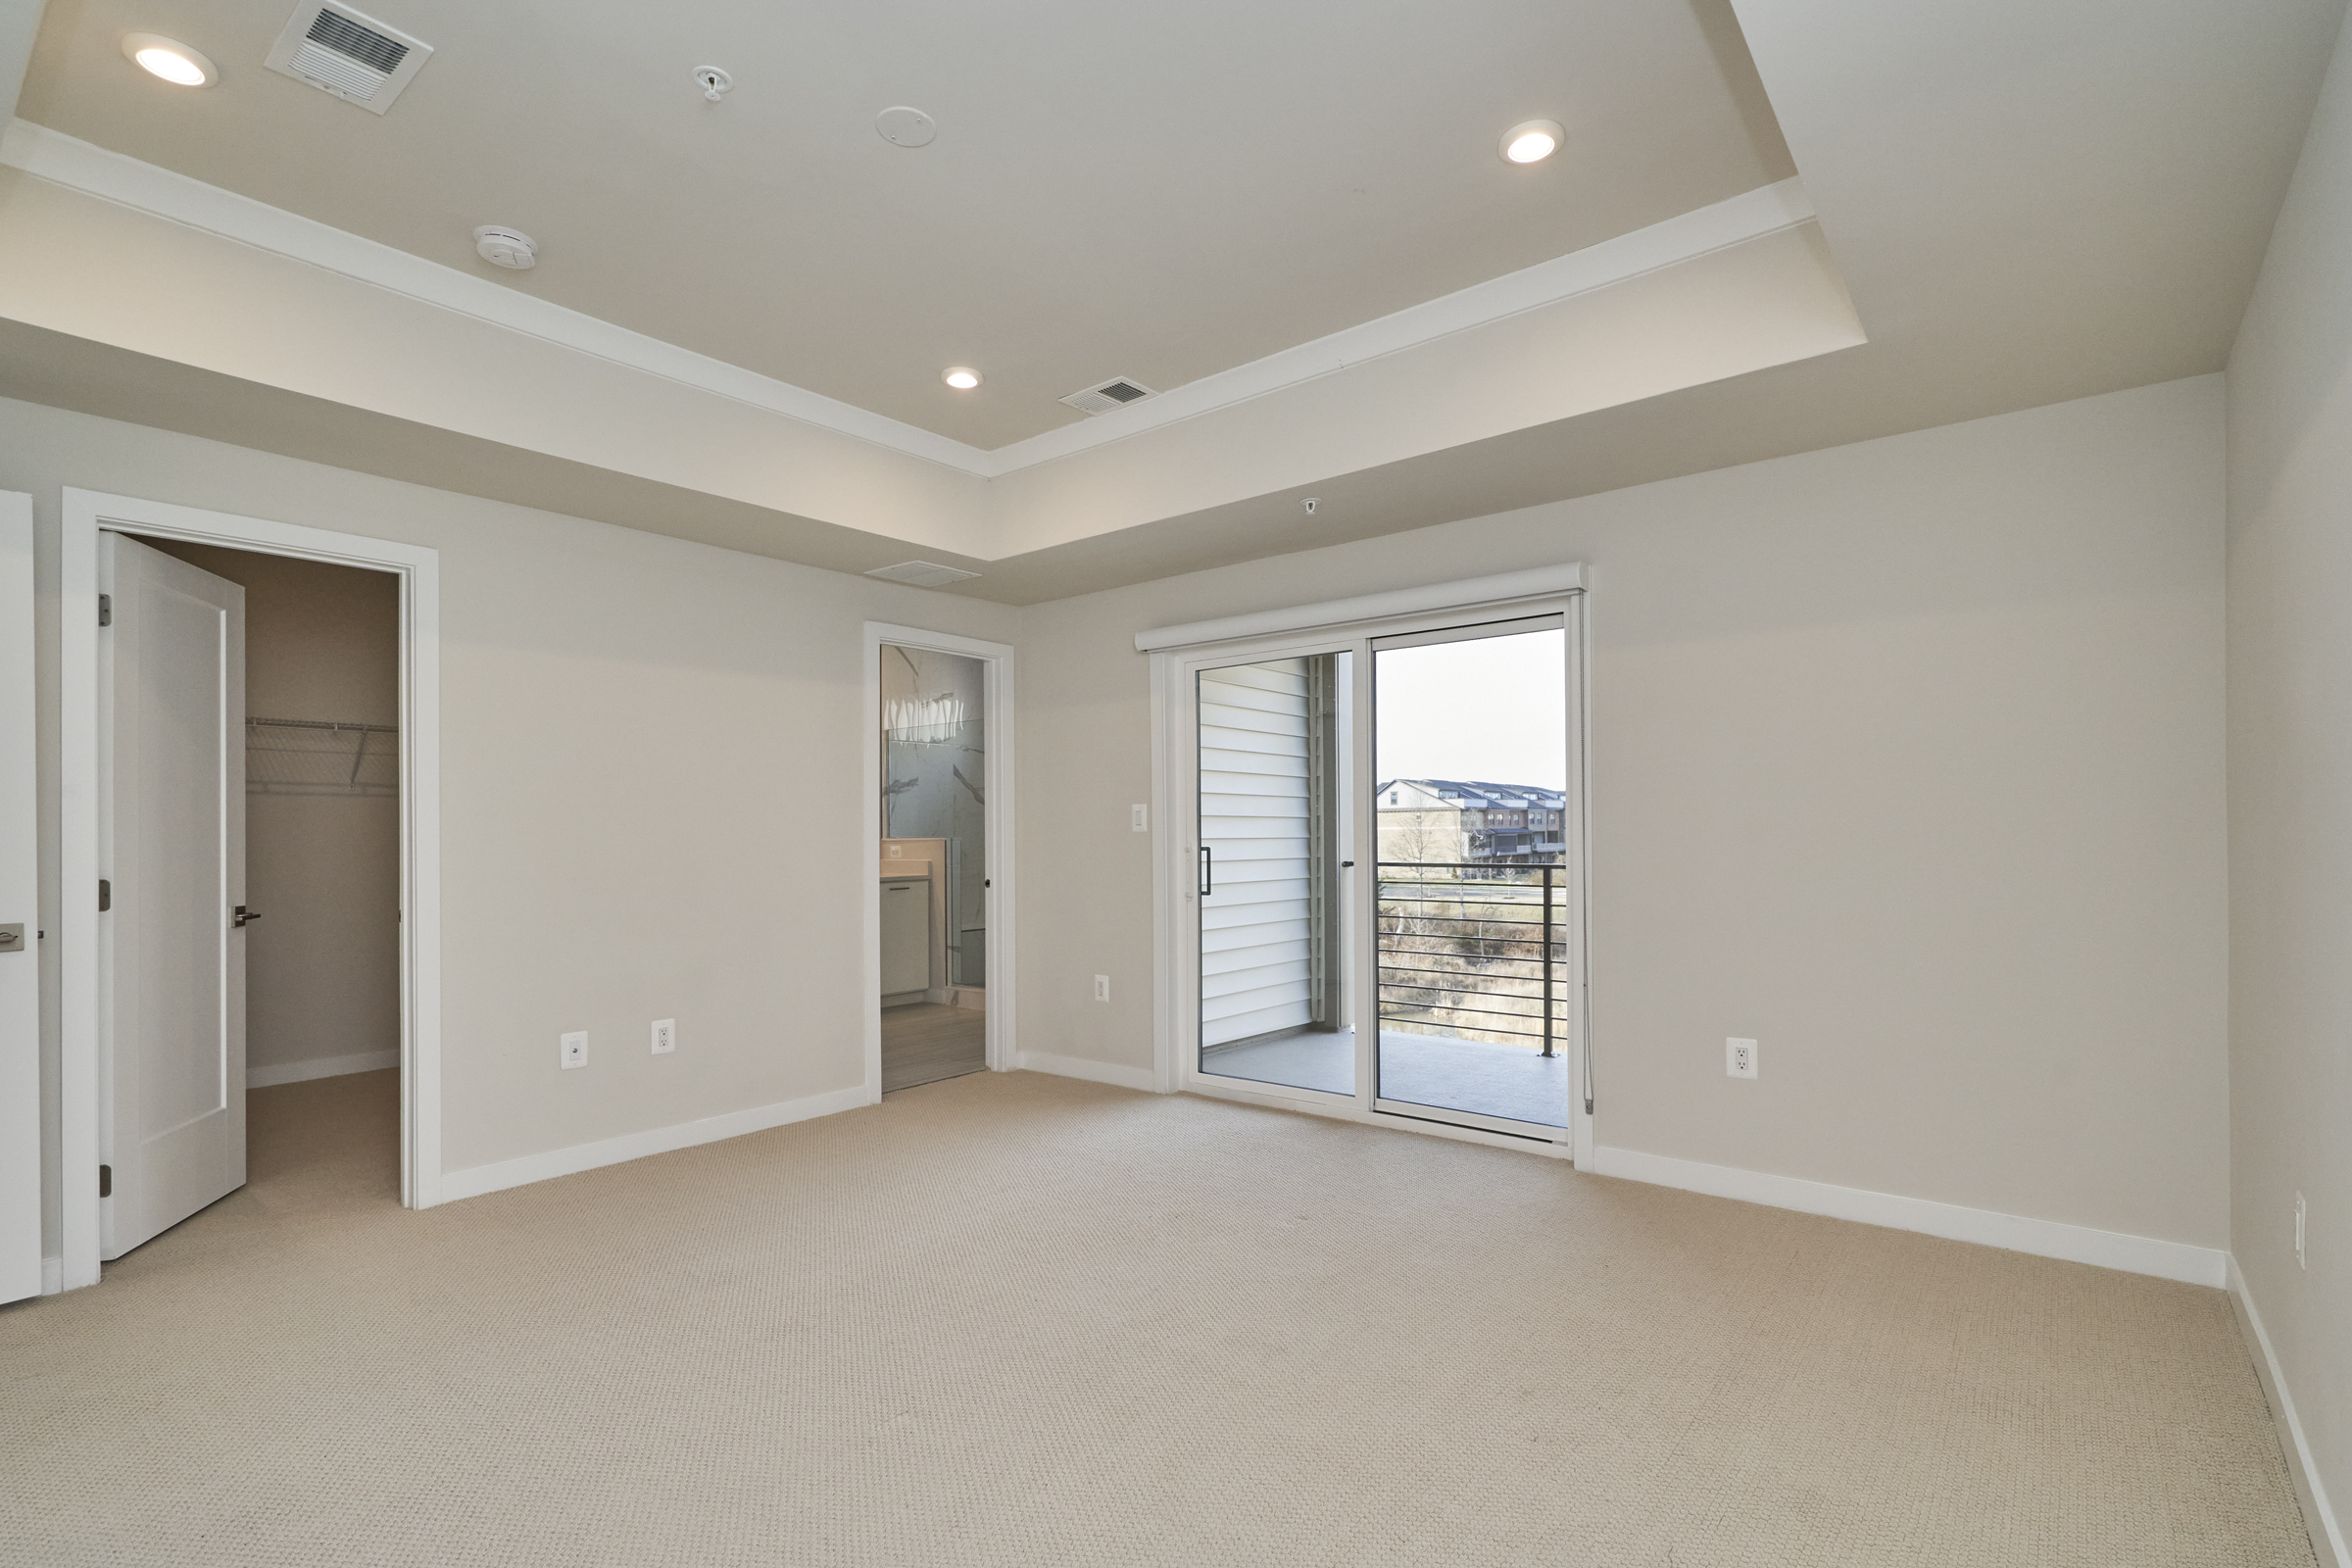 Interior professional photo of 43522 Centergate Drive - showing the primary bedroom with deep trey ceiling and view out to the balcony and walk in closet